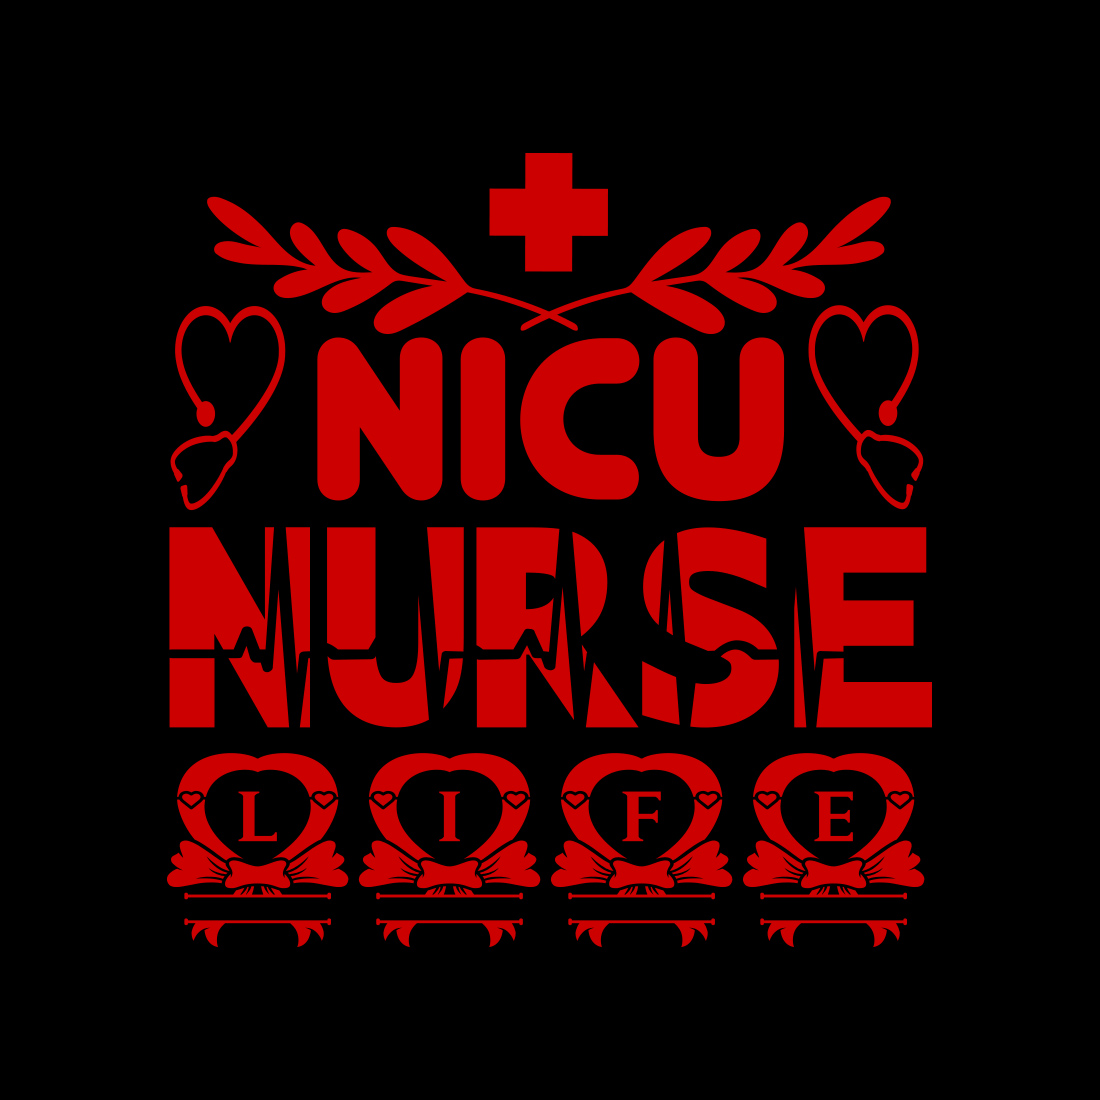 Red and black nurse's logo on a black background.